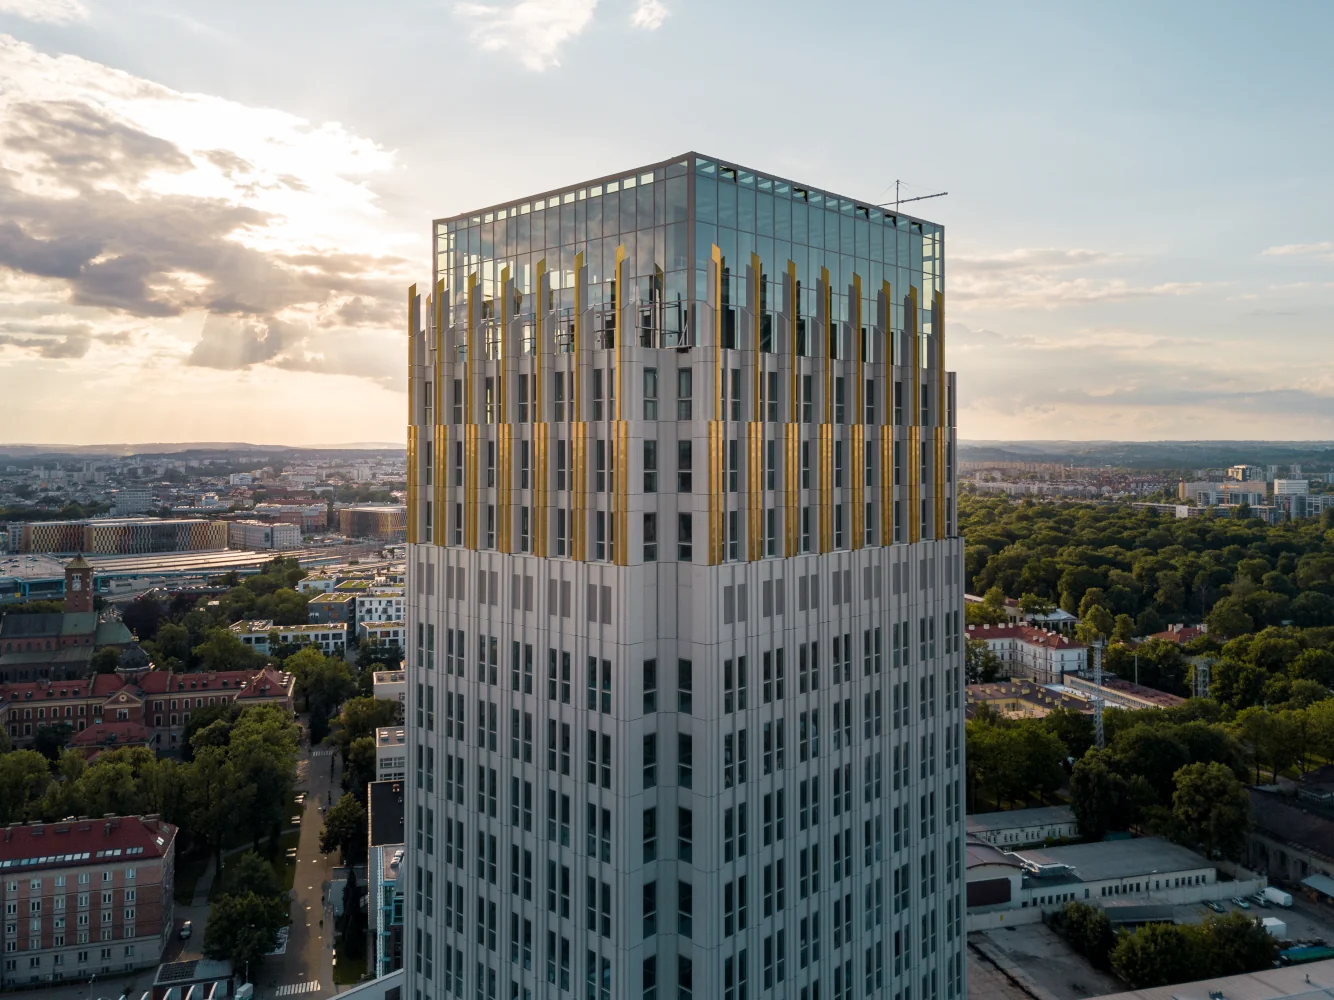 Unity Tower